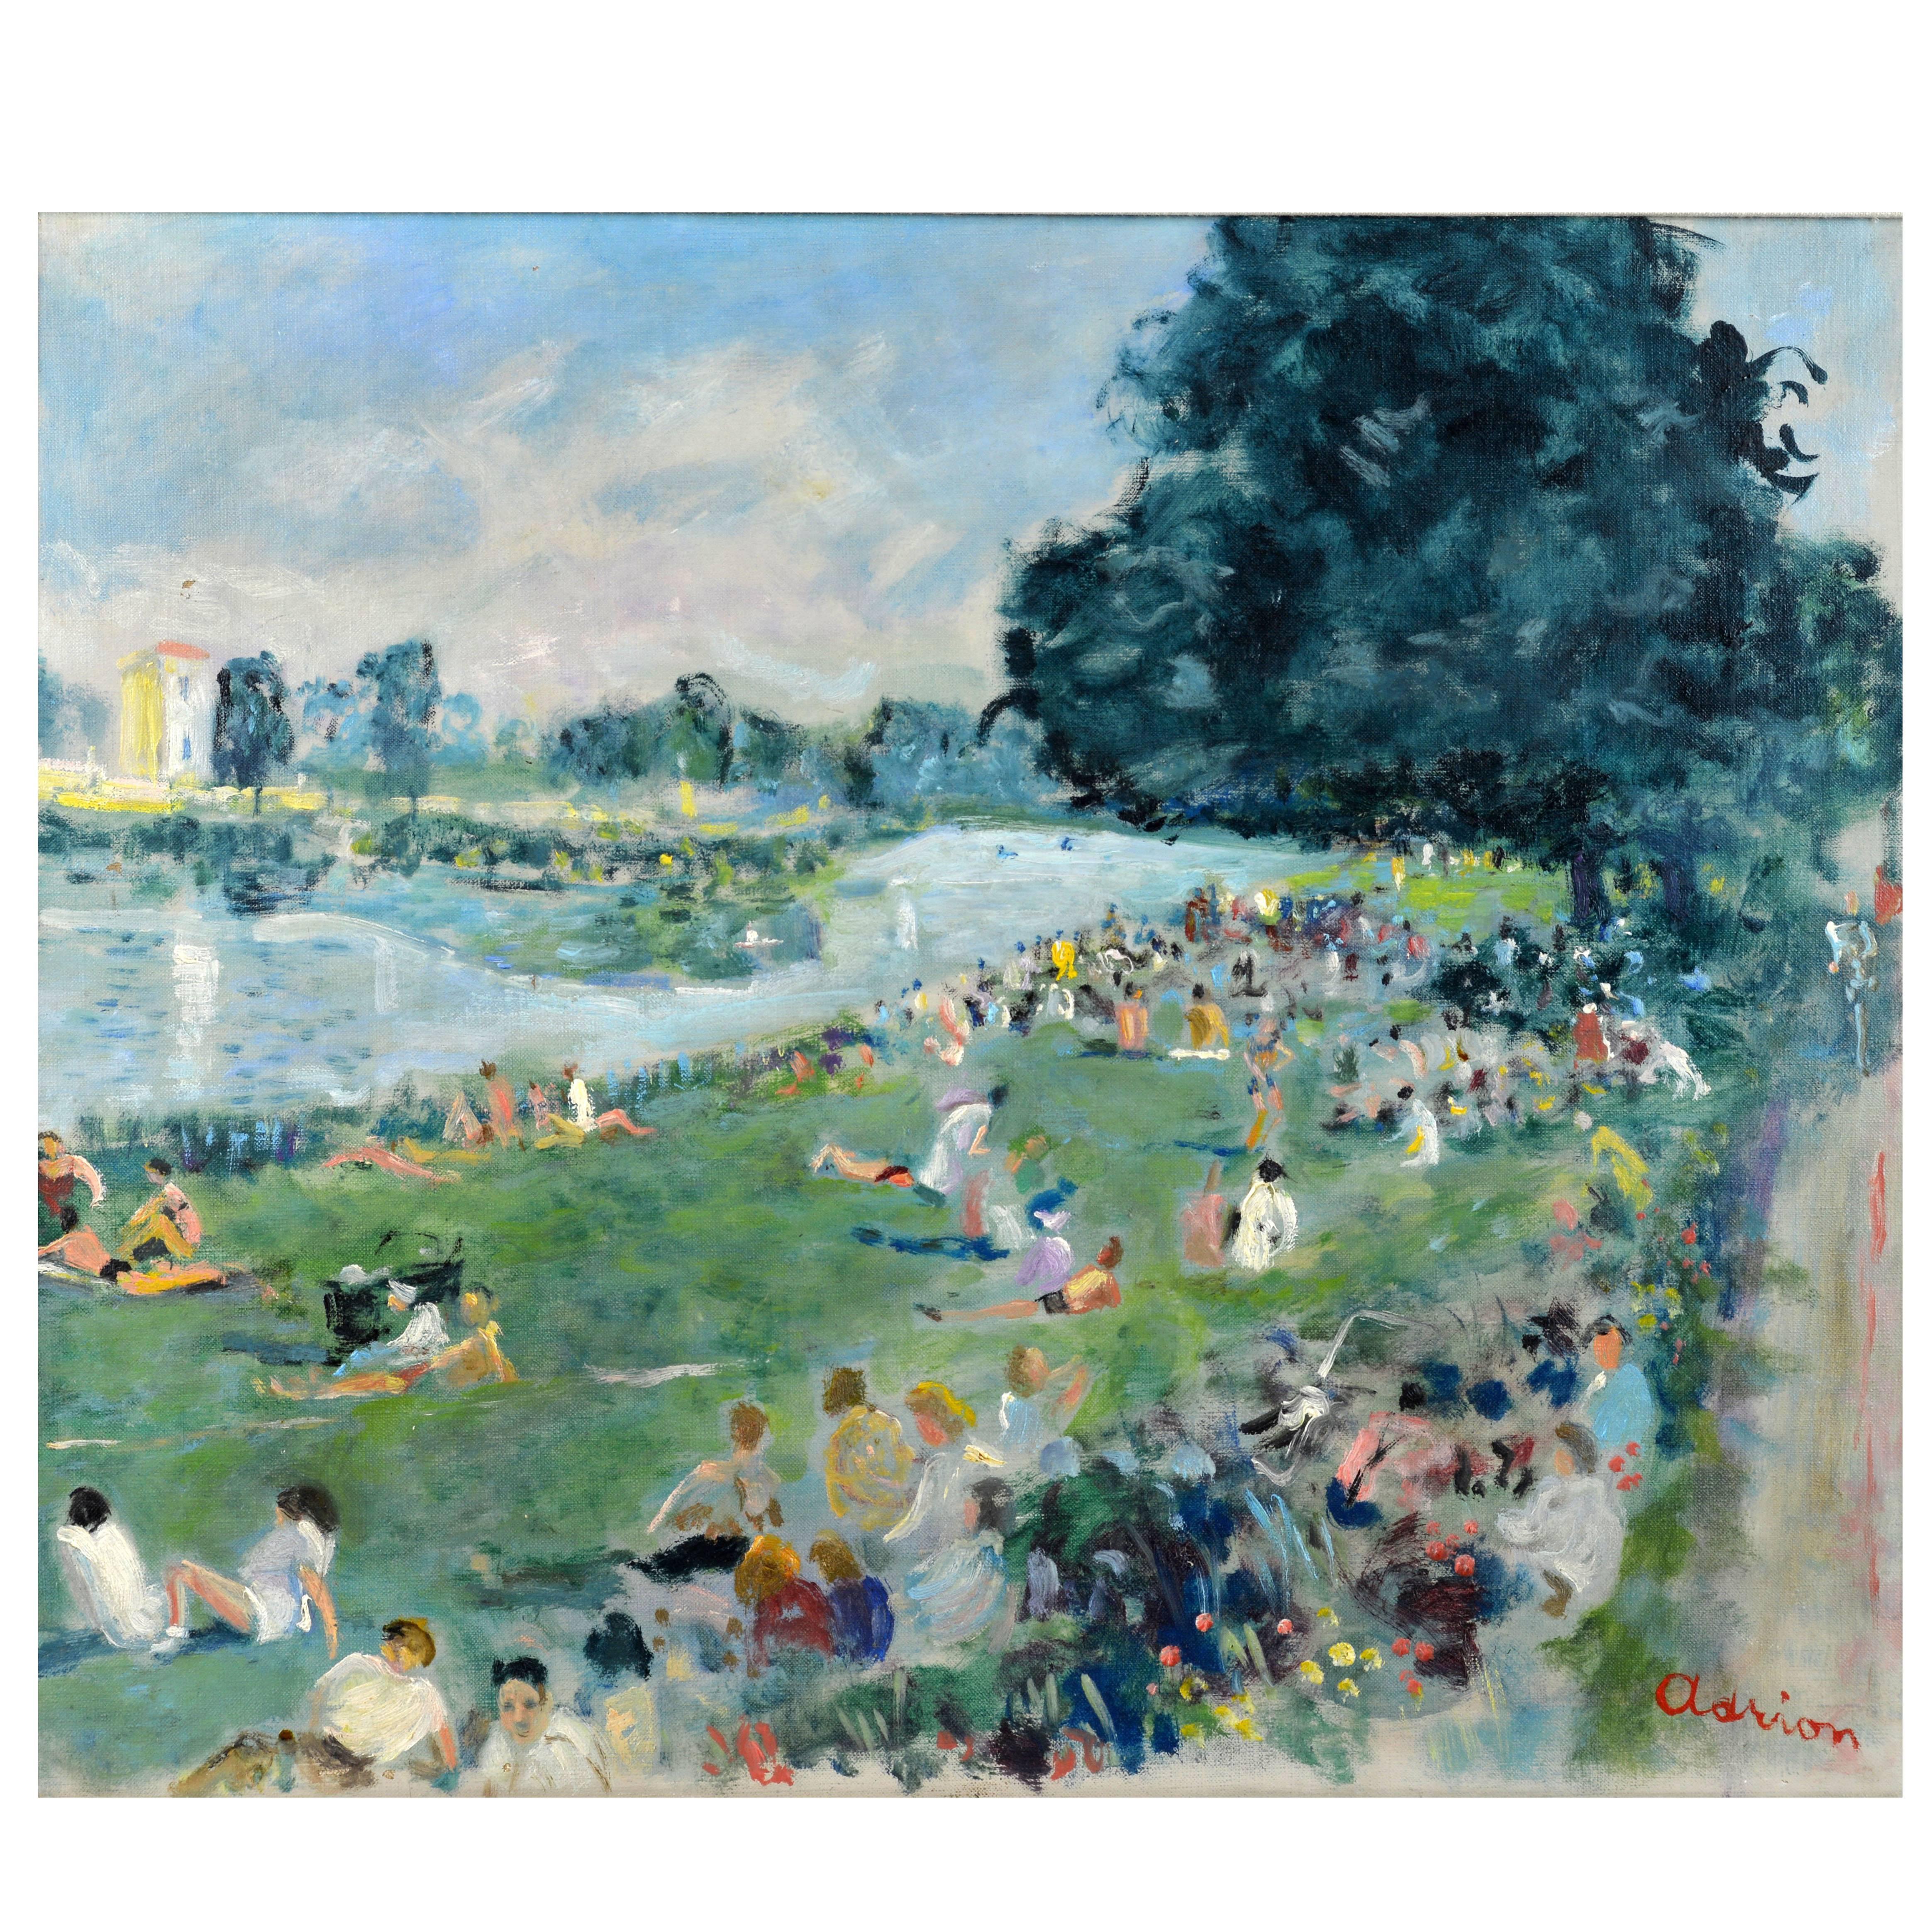 Summer in the Park, Paris by Lucien Adrion, French Post Impressionist